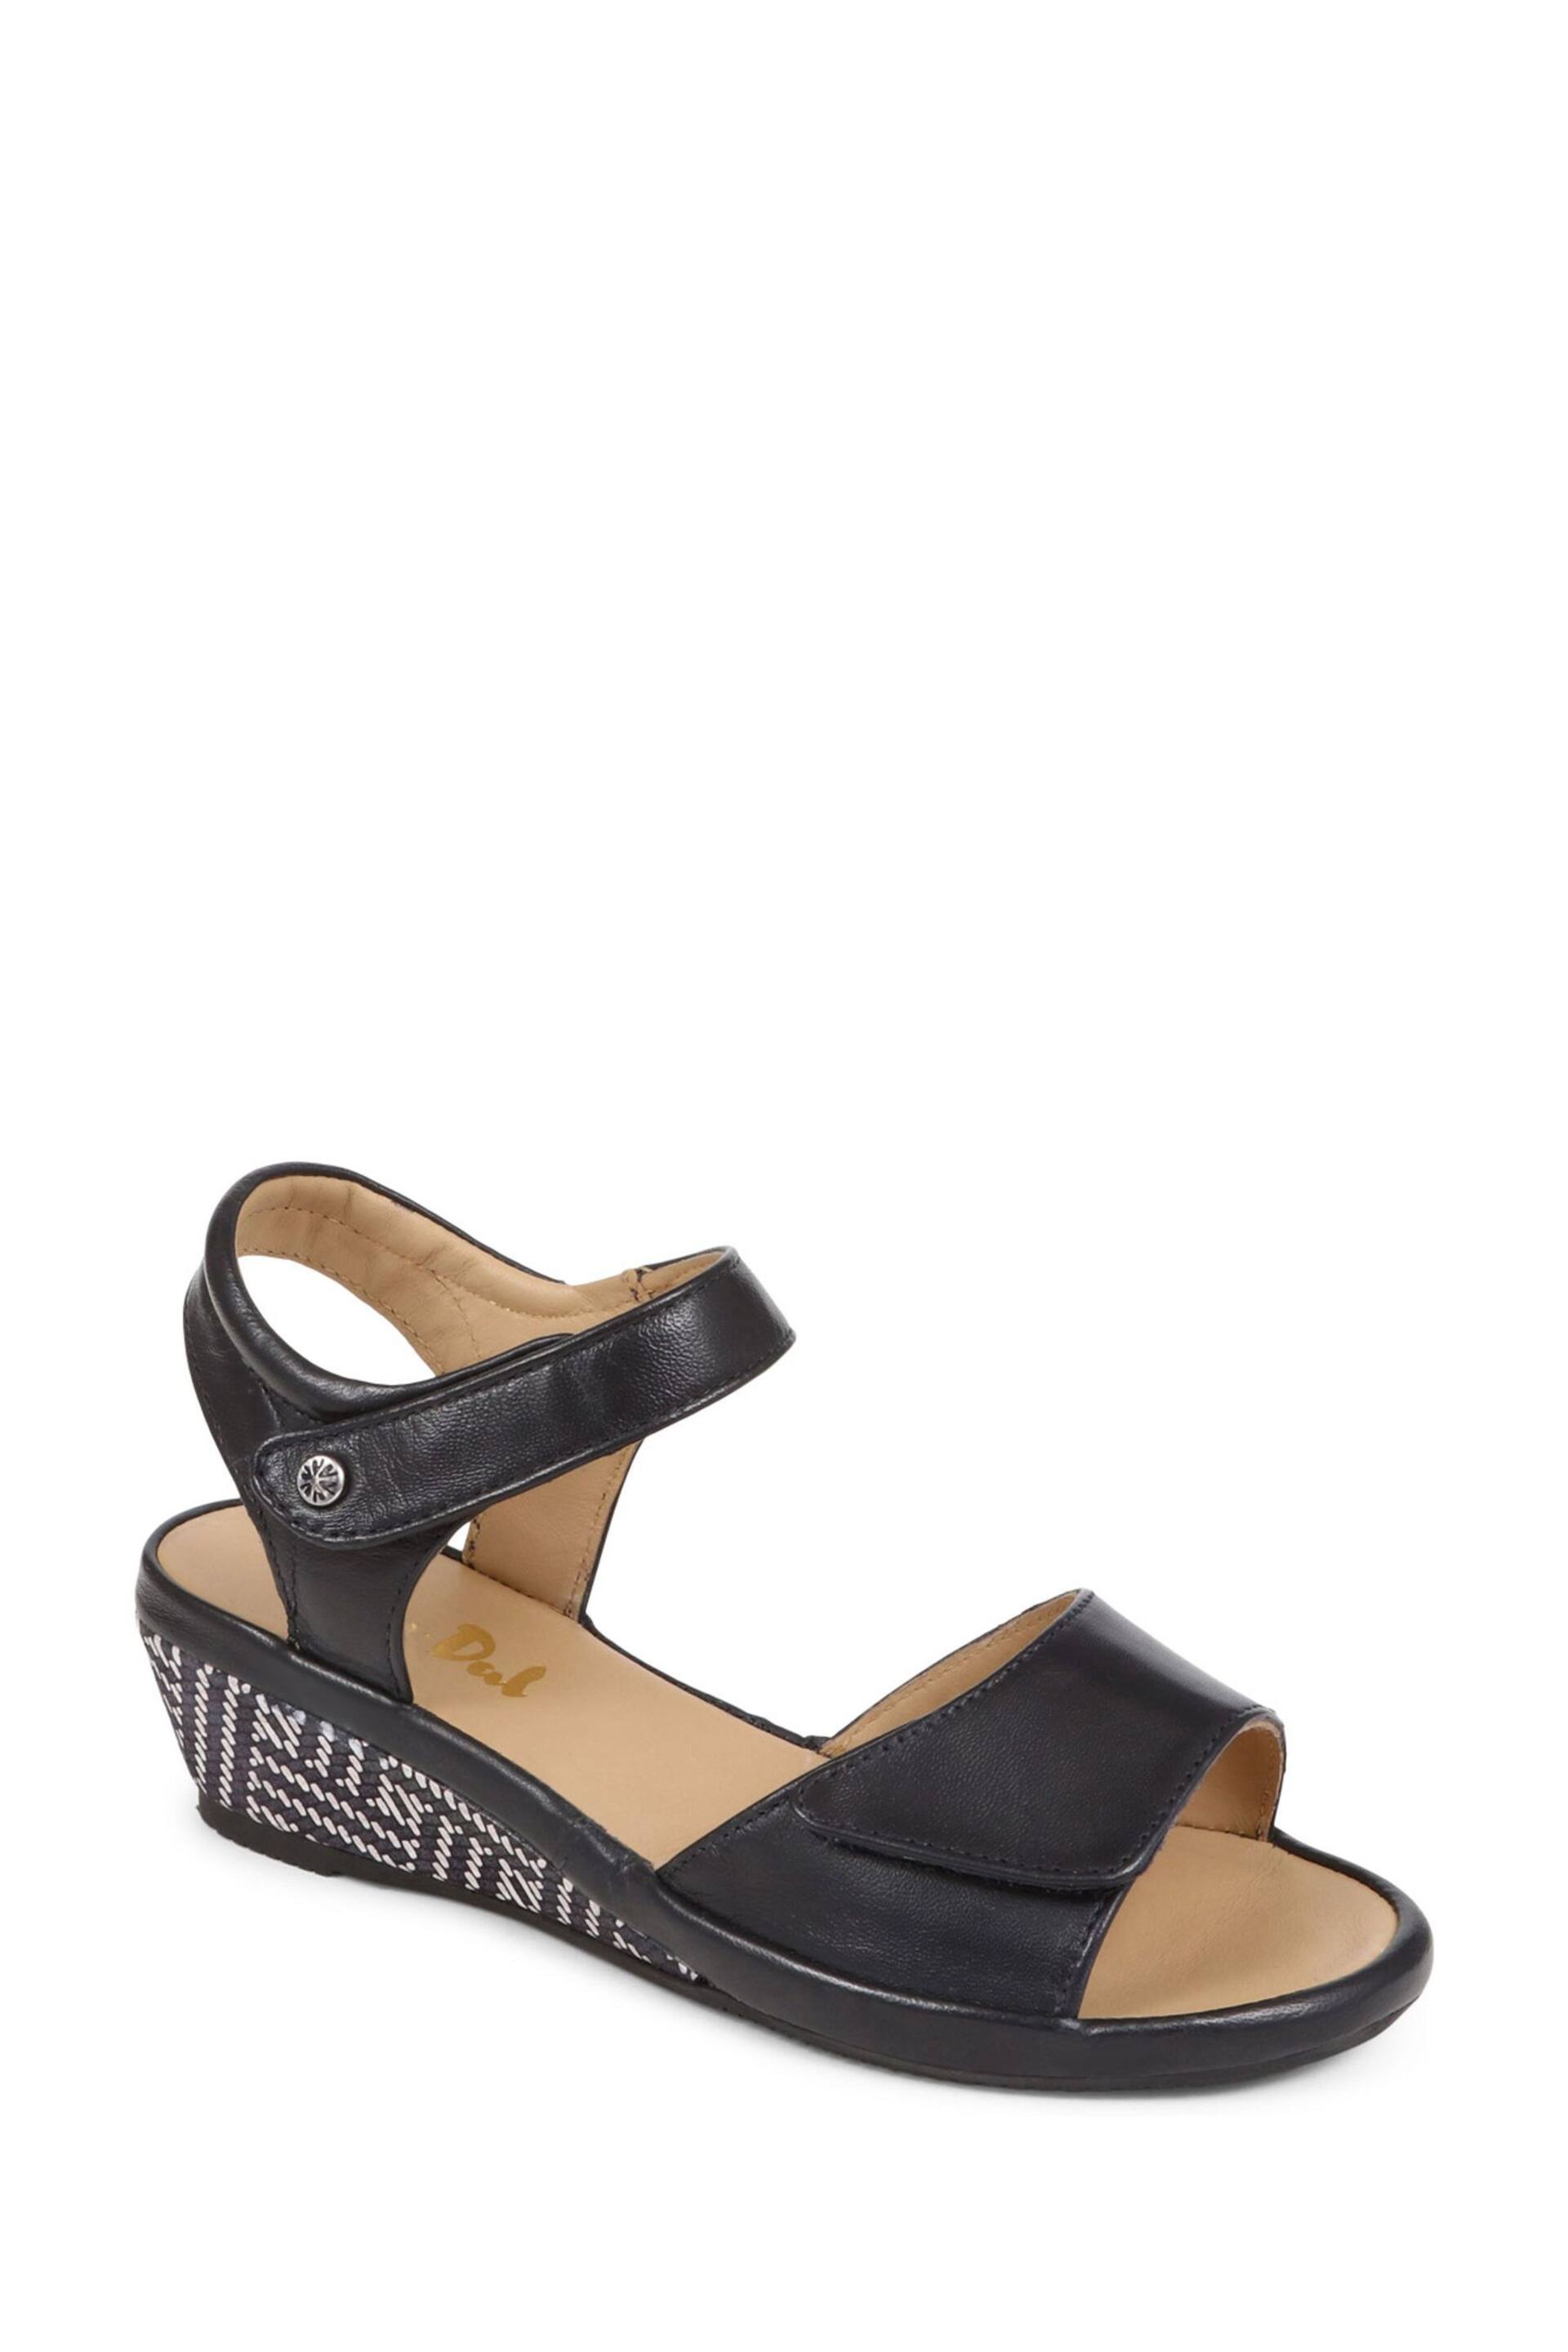 Van Dal Dual Strap Leather Sandals - Image 3 of 6